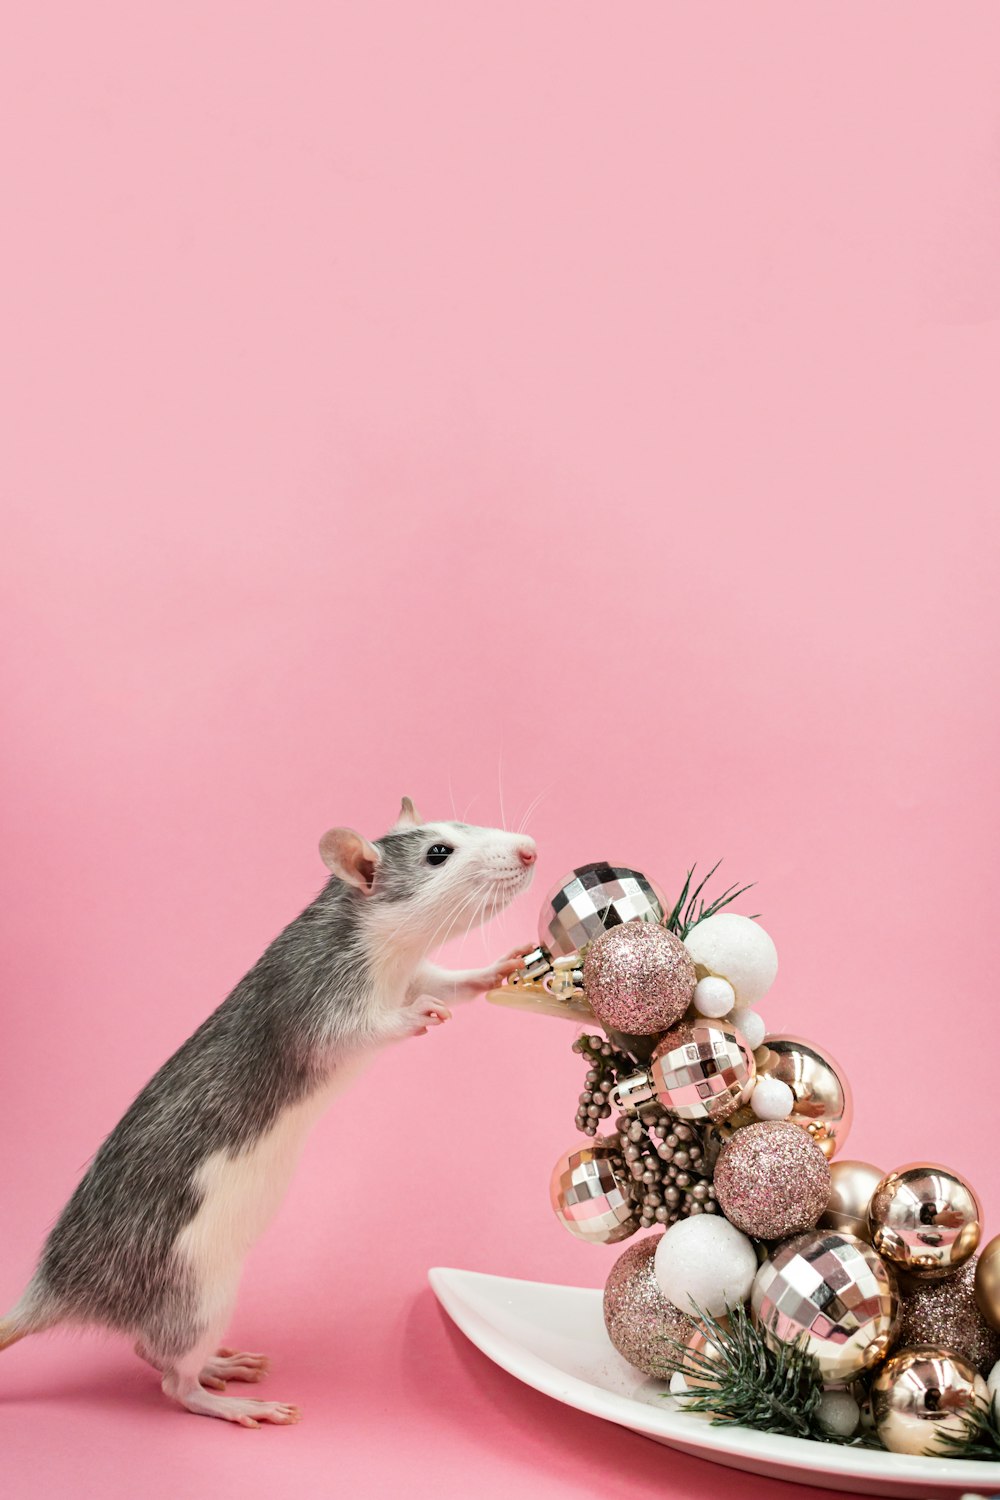 a rat on a plate with ornaments on a pink background